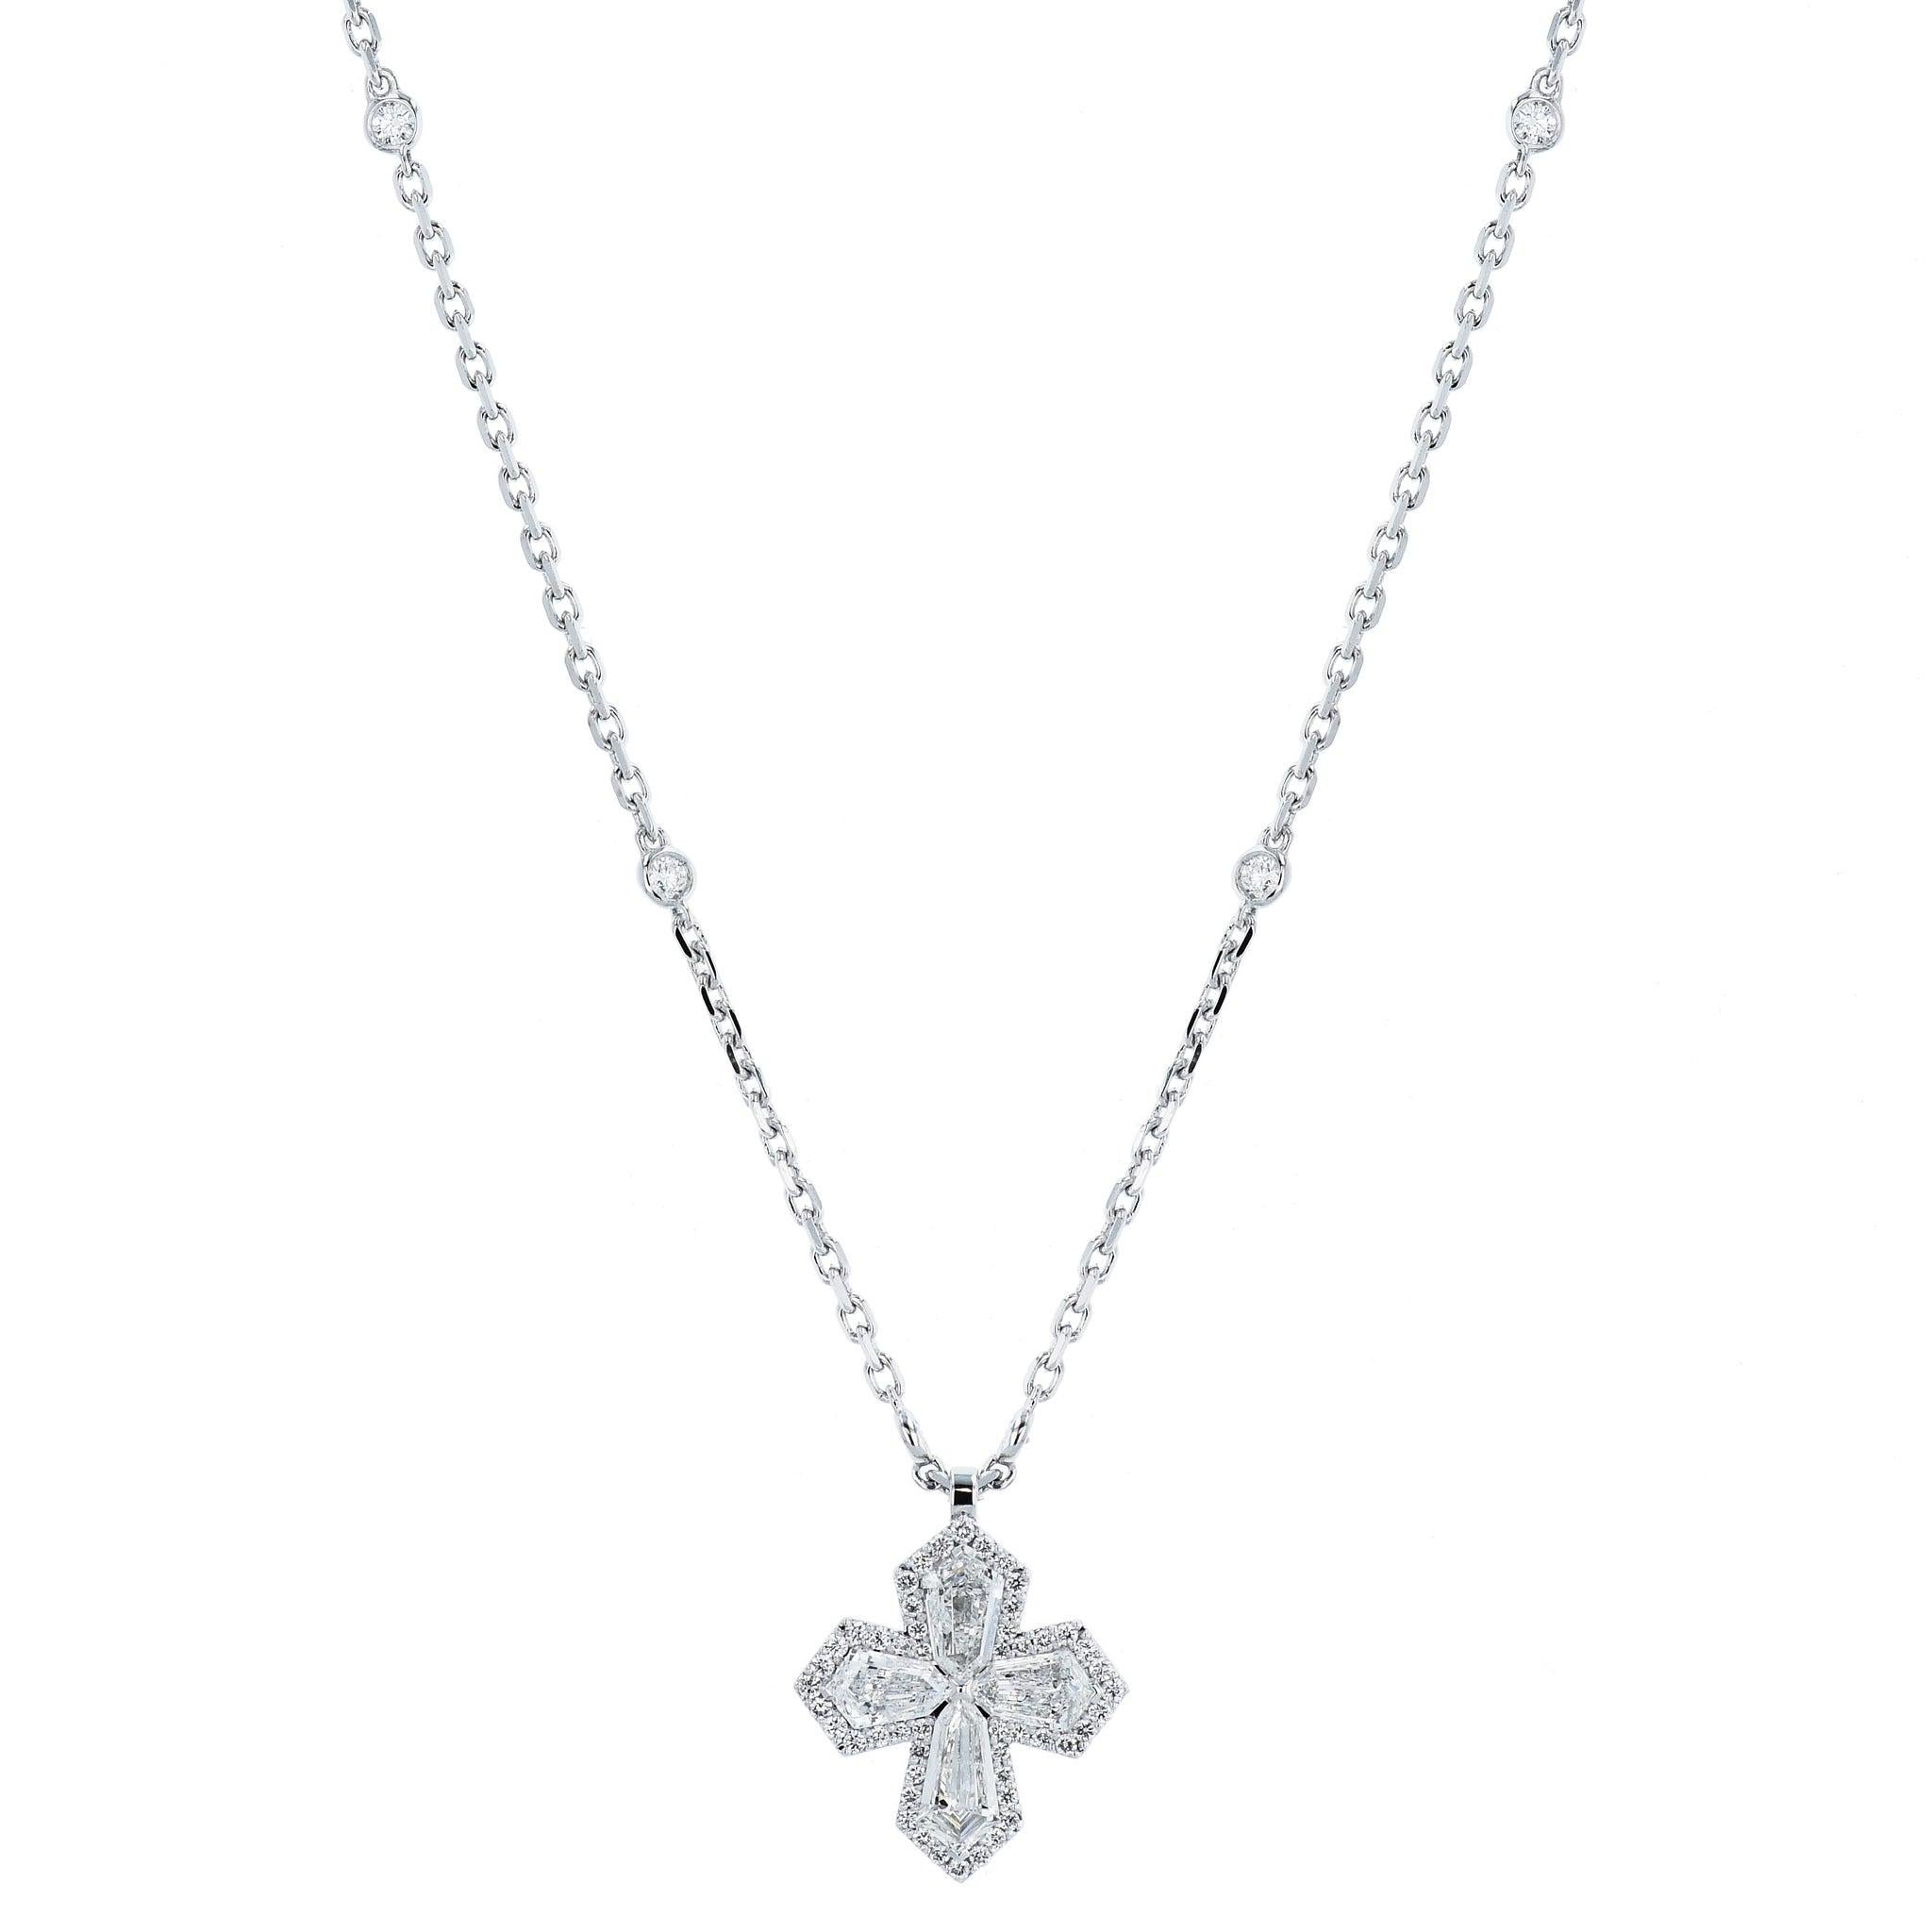 Elevate yourself with this awe-inspiring Diamond Cross White Gold Pendant Necklace.
This beautiful cross and necklace are crafted with 18 Karat white gold. It boasts 1.57 carats of F-VS1, 0.25ct F-SI diamonds, 0.25ct F-VS diamonds, and 1.12ct F-VS